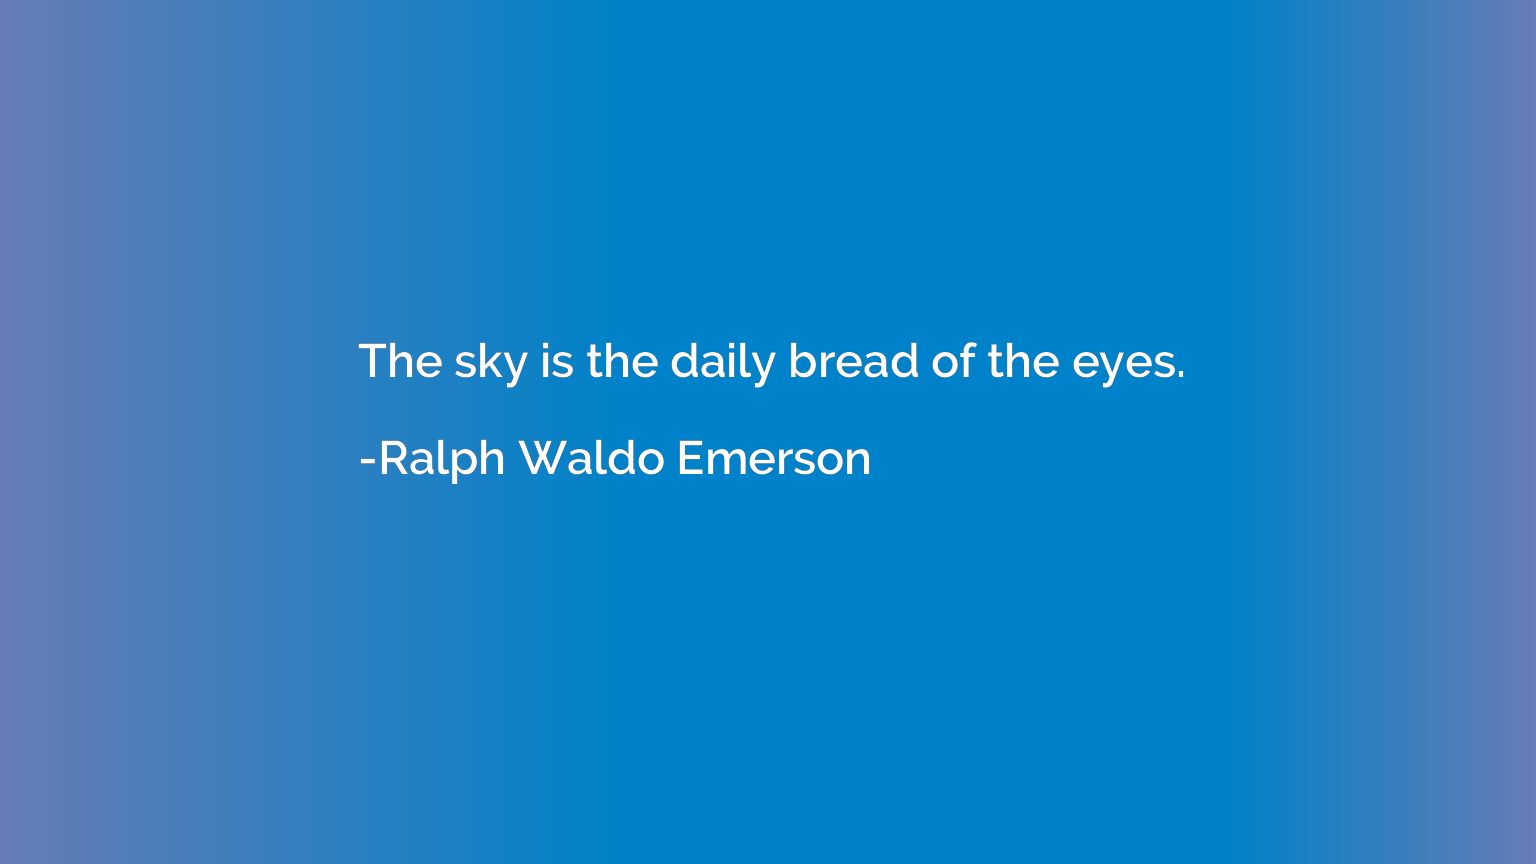 The sky is the daily bread of the eyes.